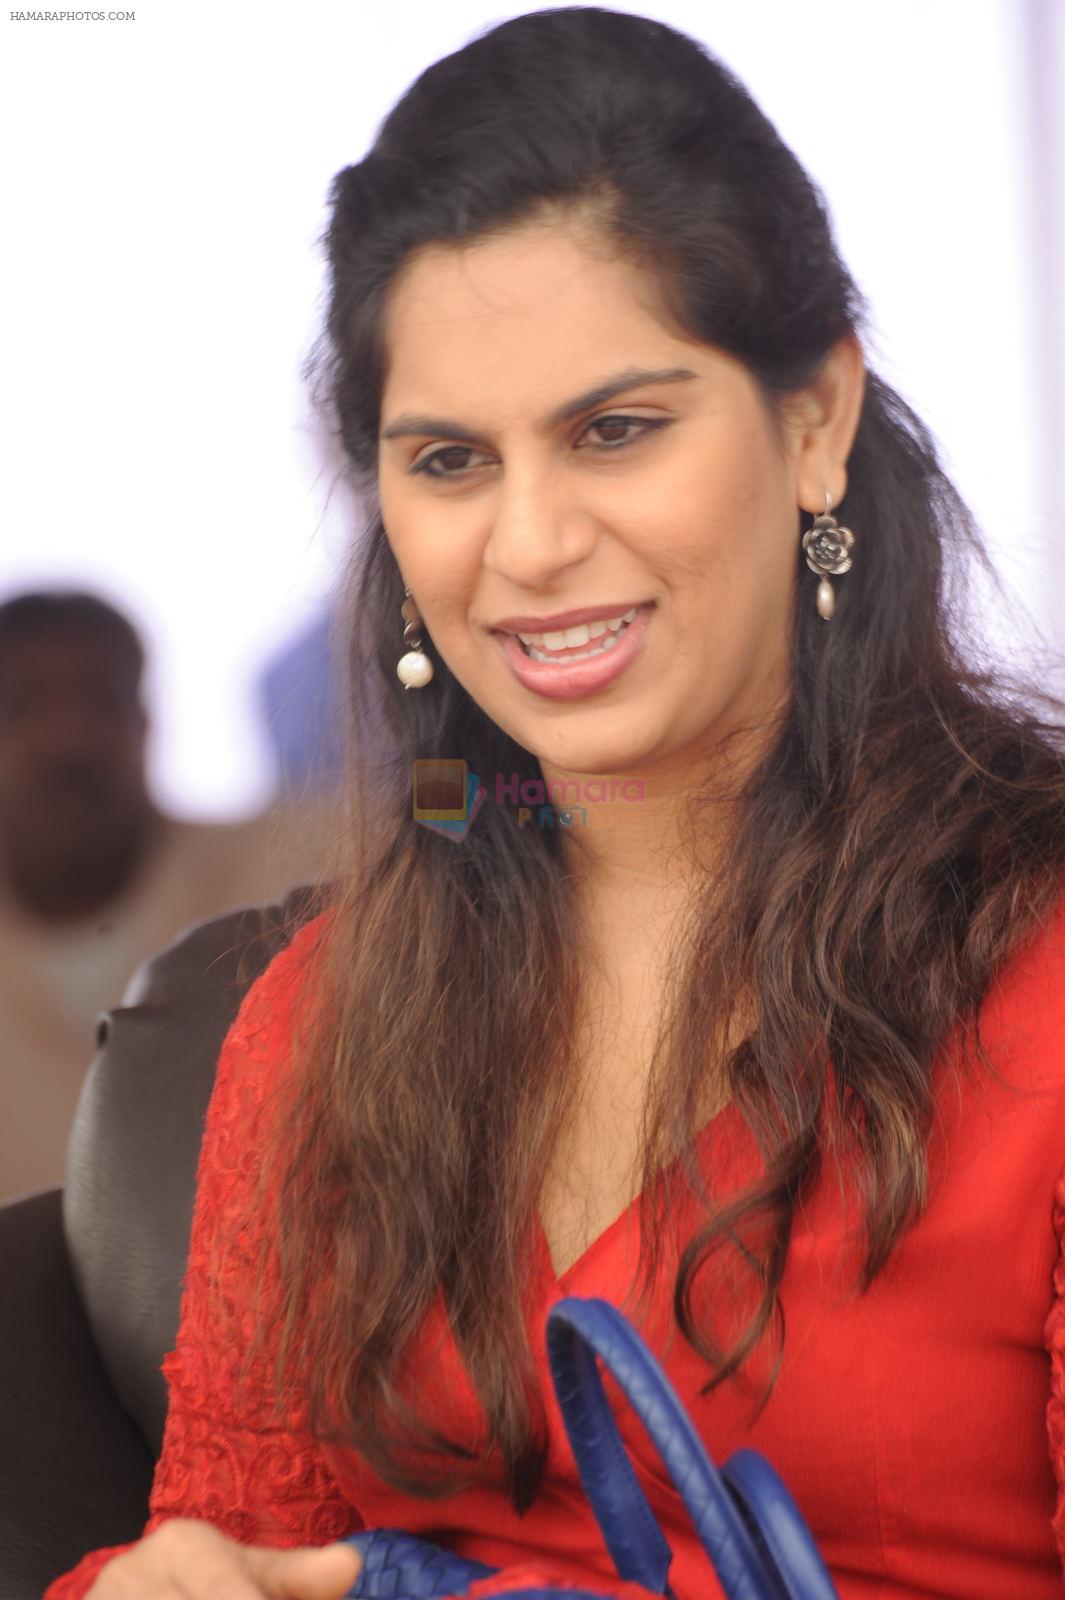 Upasana attends POLO Game Final Event on 6th September 2011